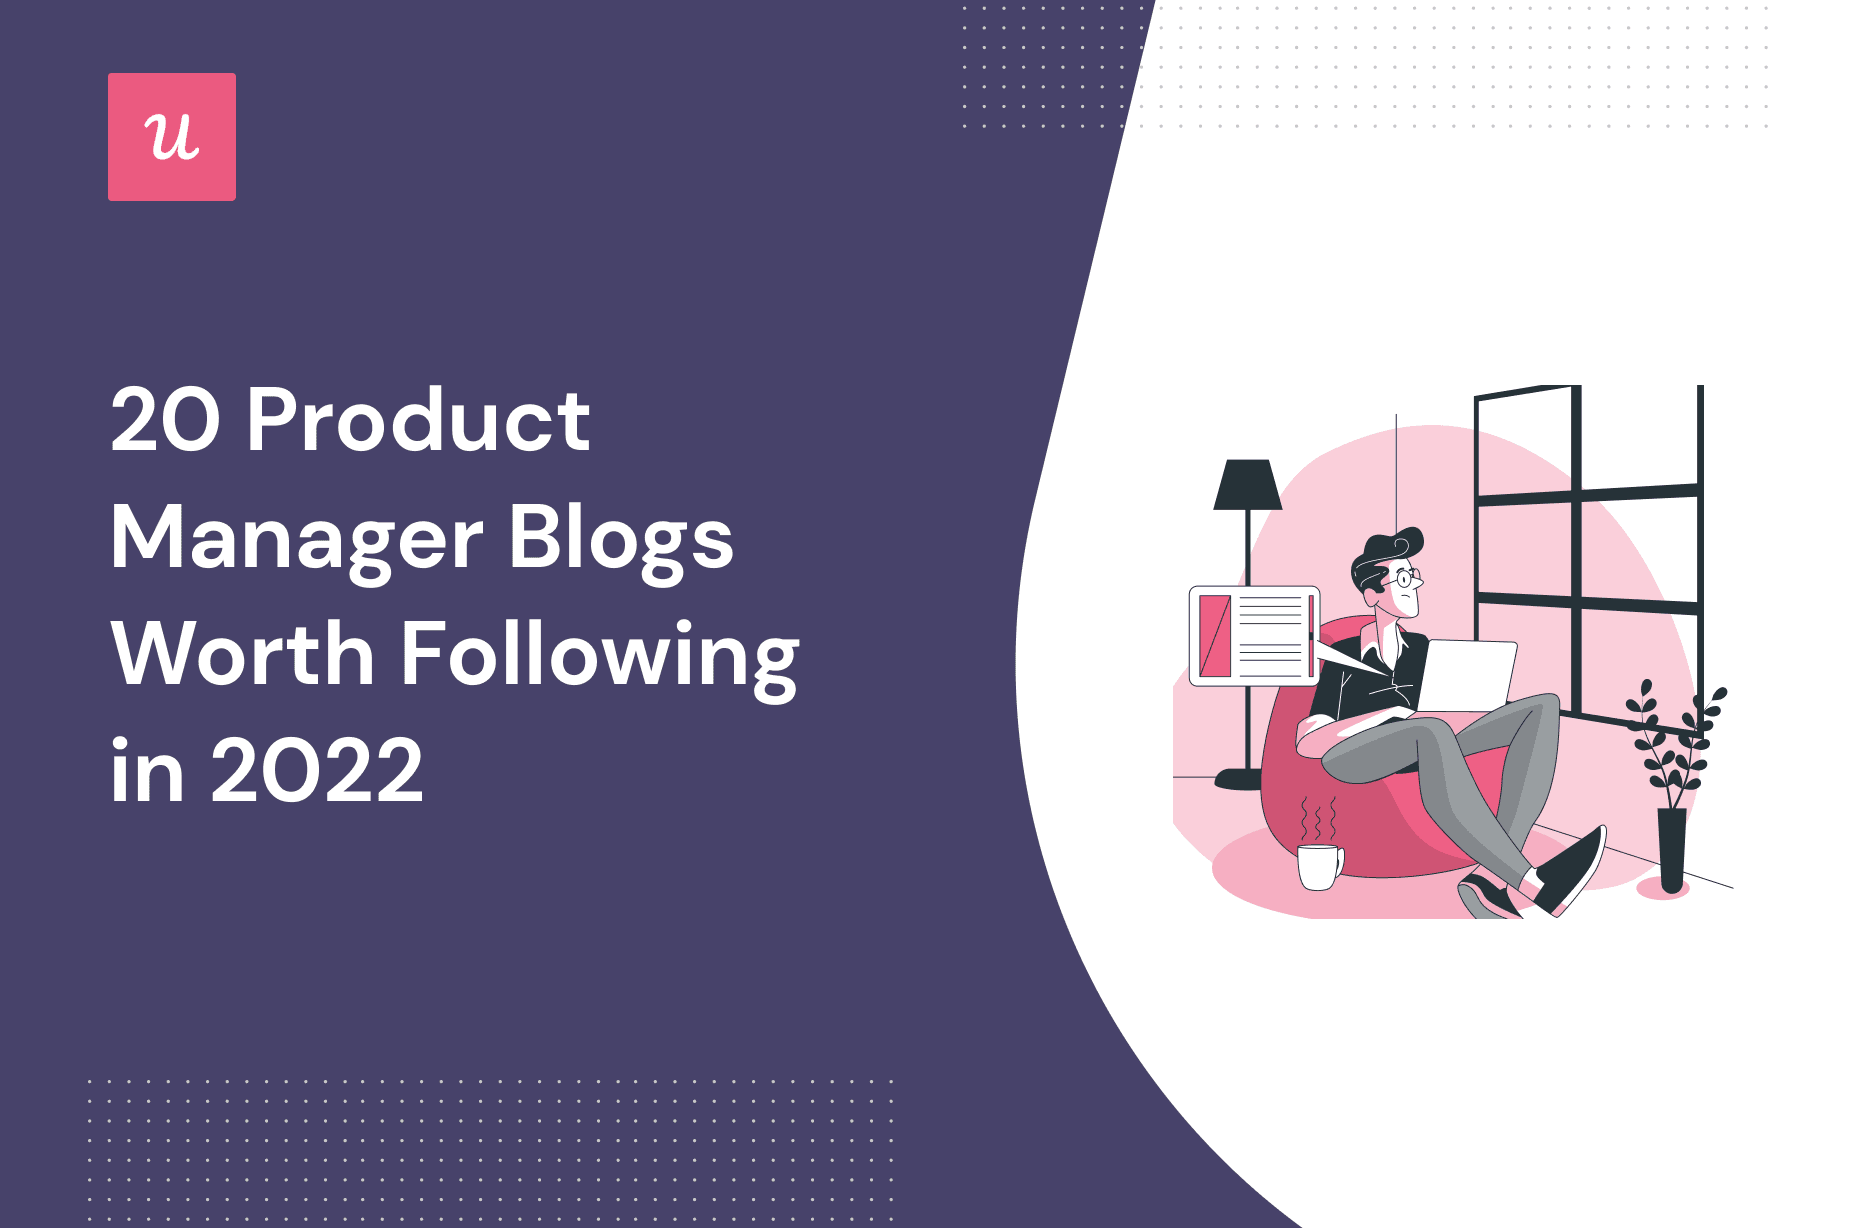 20 Product Manager Blogs Worth Following in 2022 cover